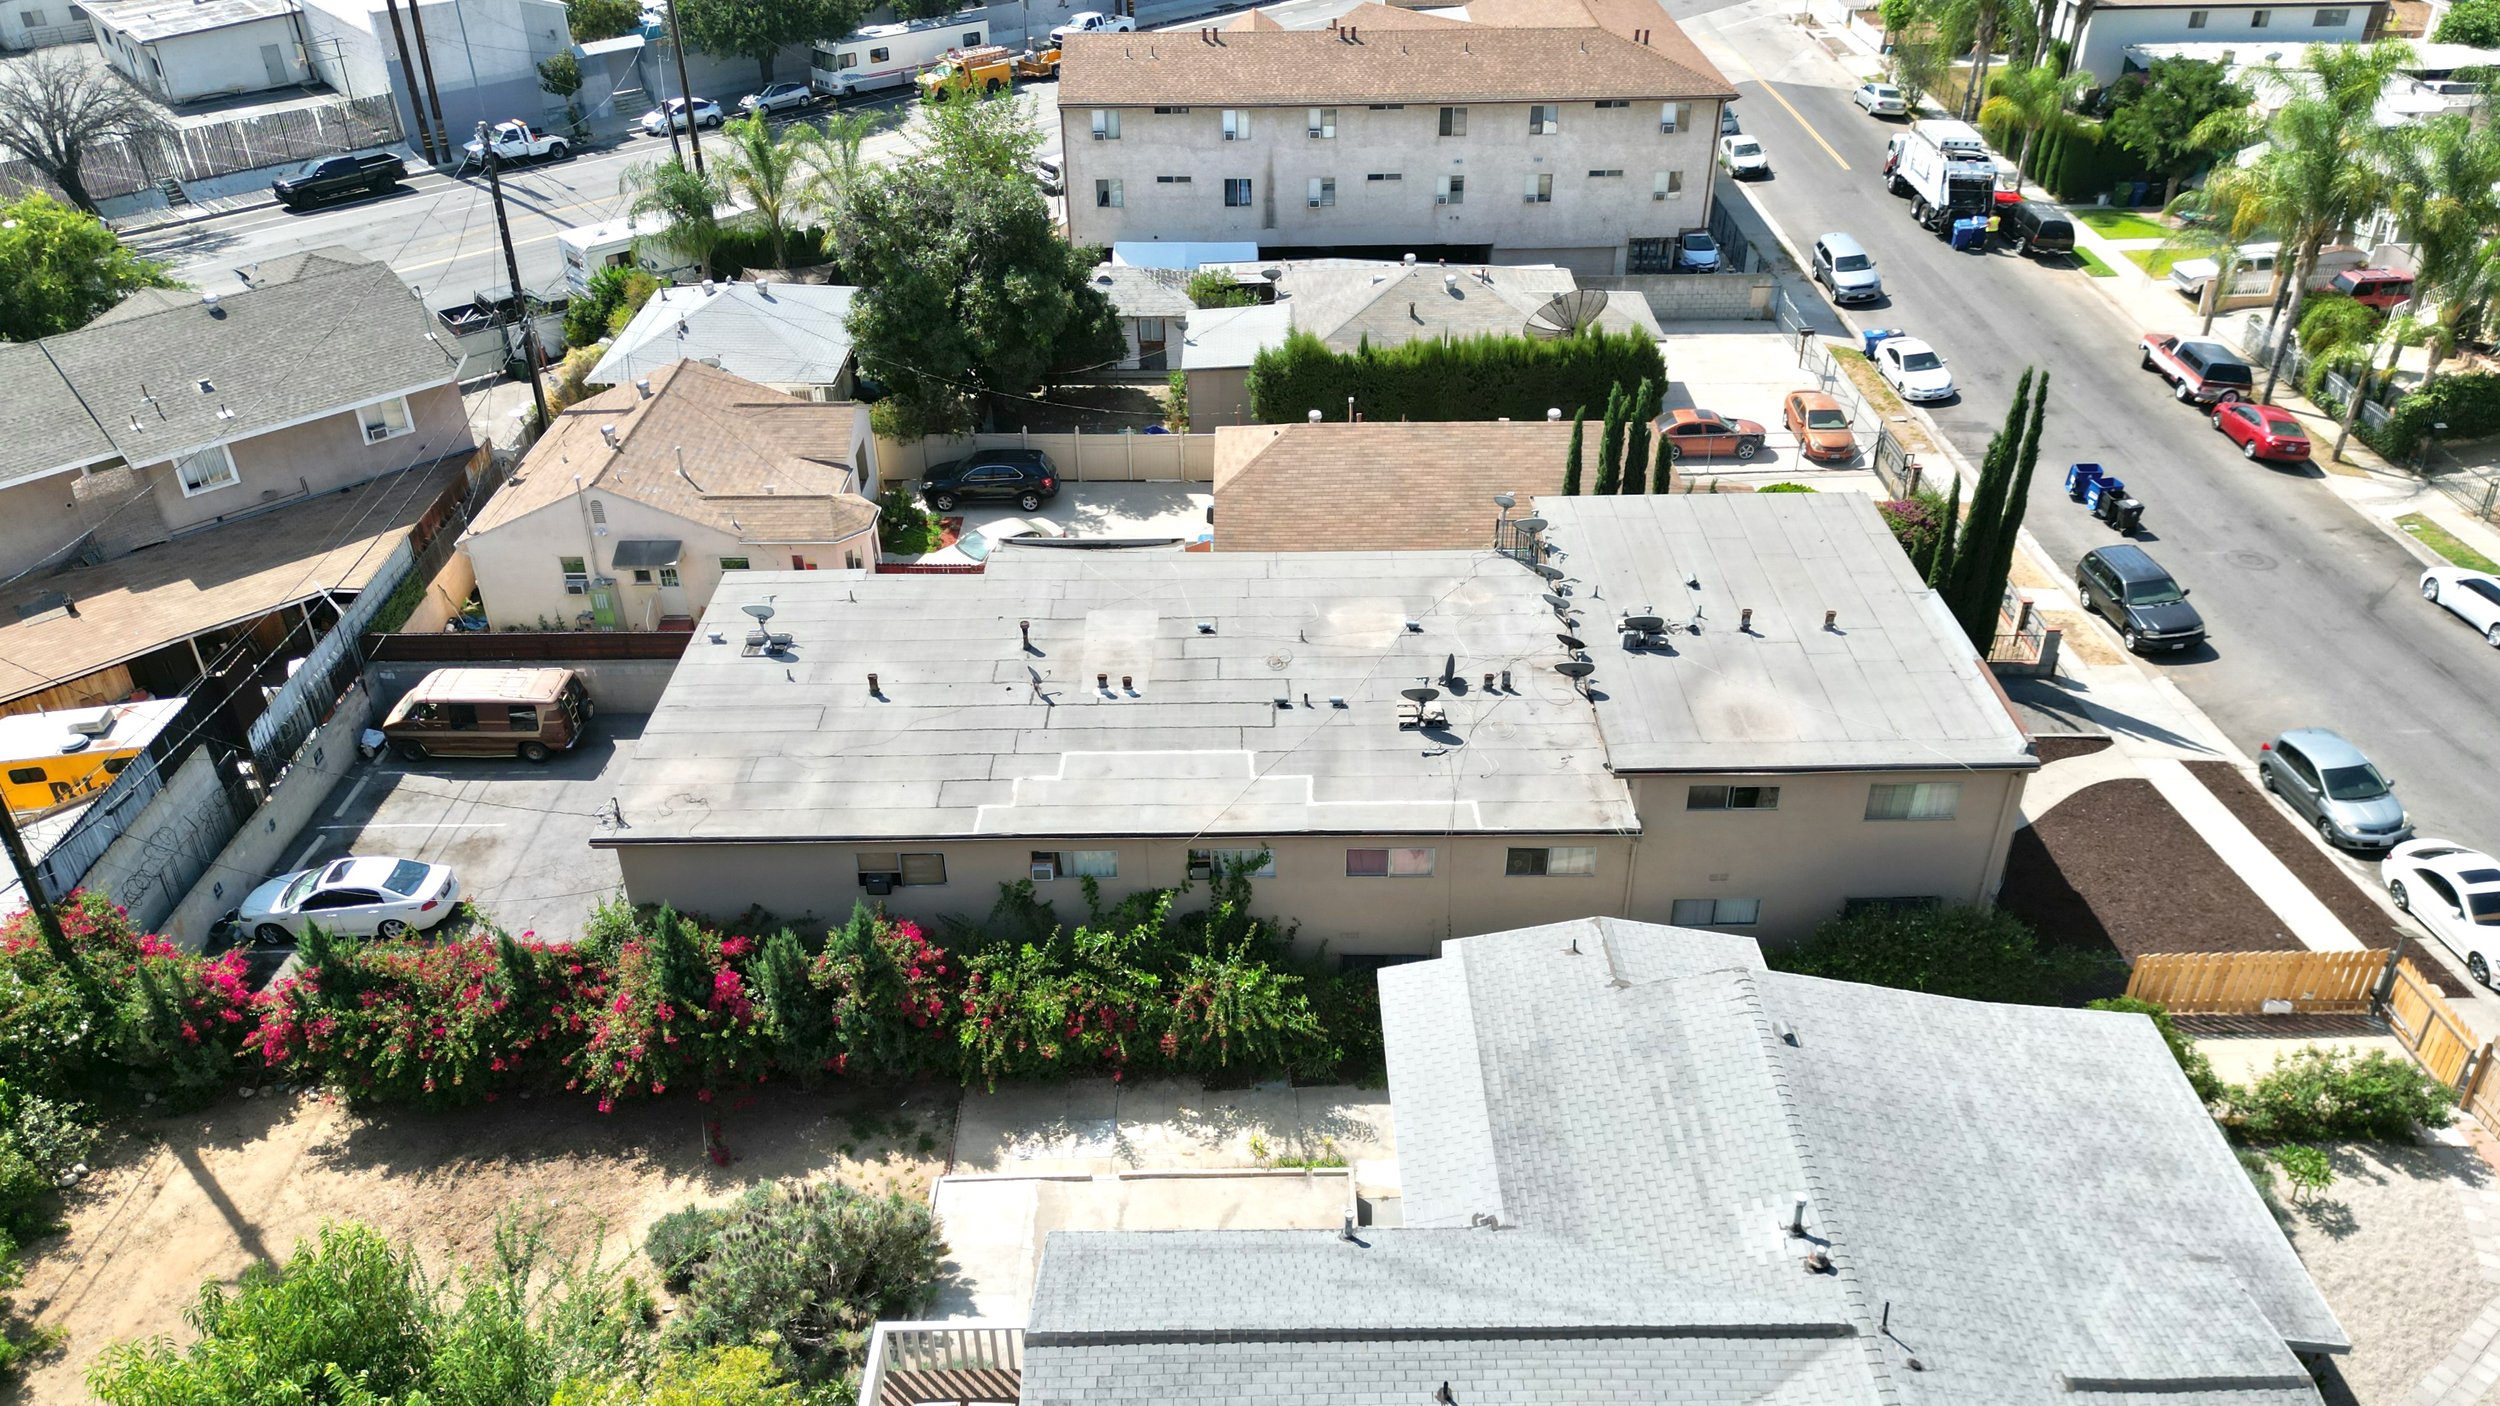 Aerial view of a residential block with buildings, flowering bushes, and street parking.